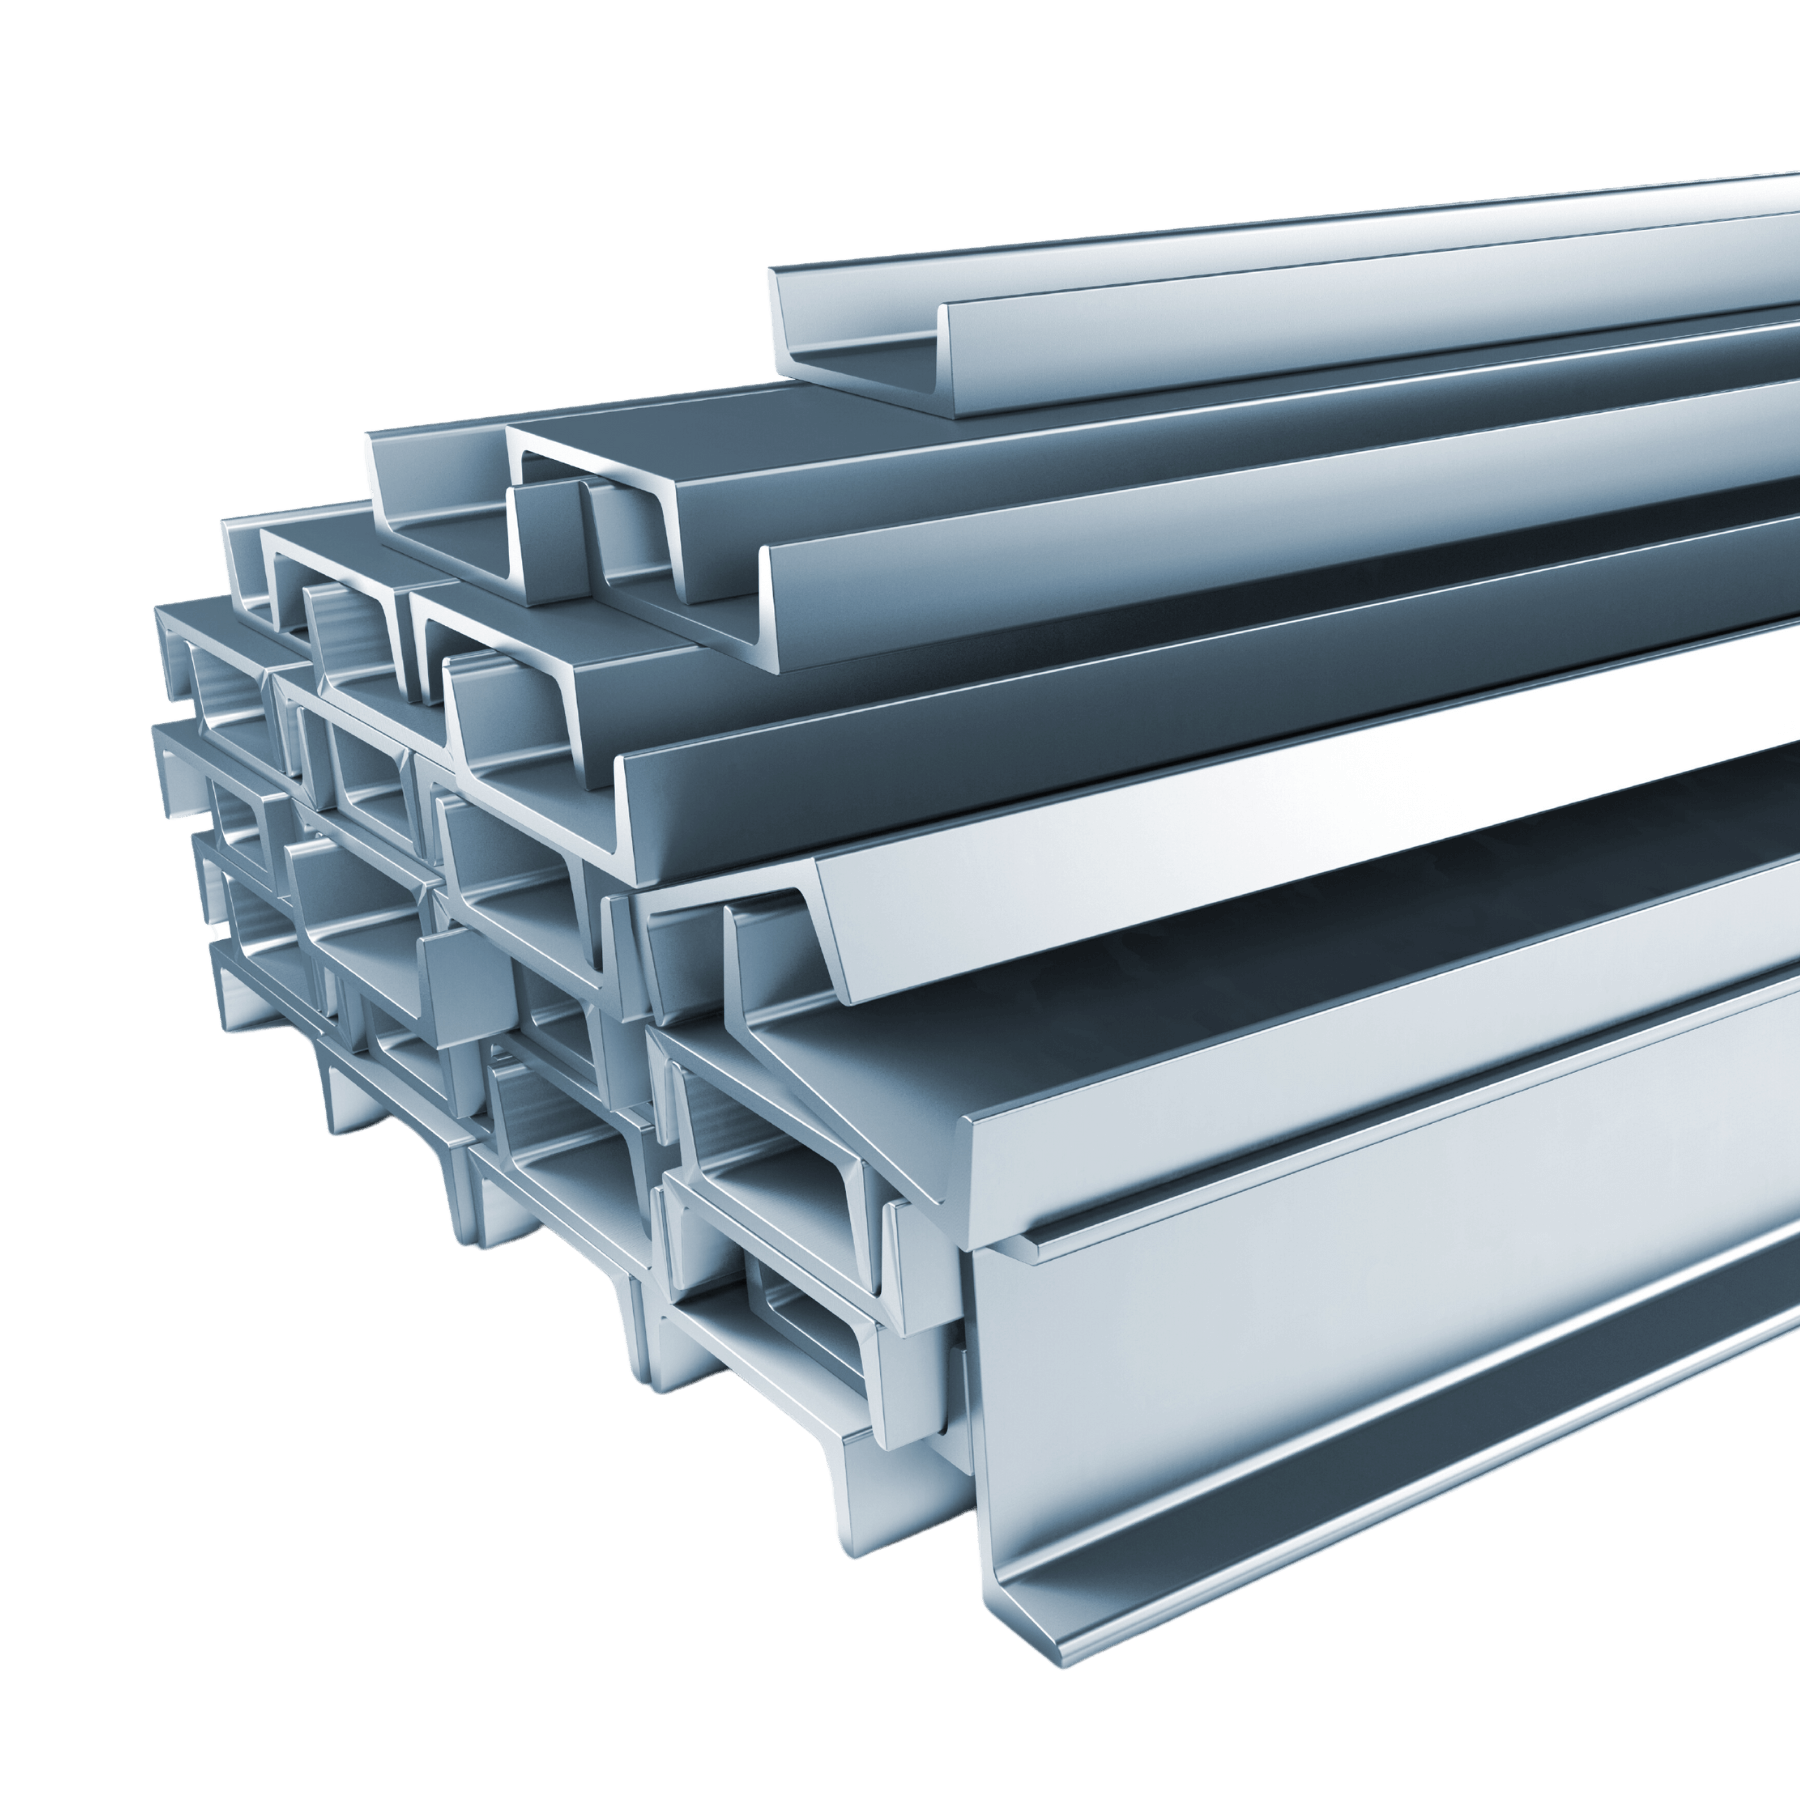 STEEL CHANNELS - From $64.31 /cwt